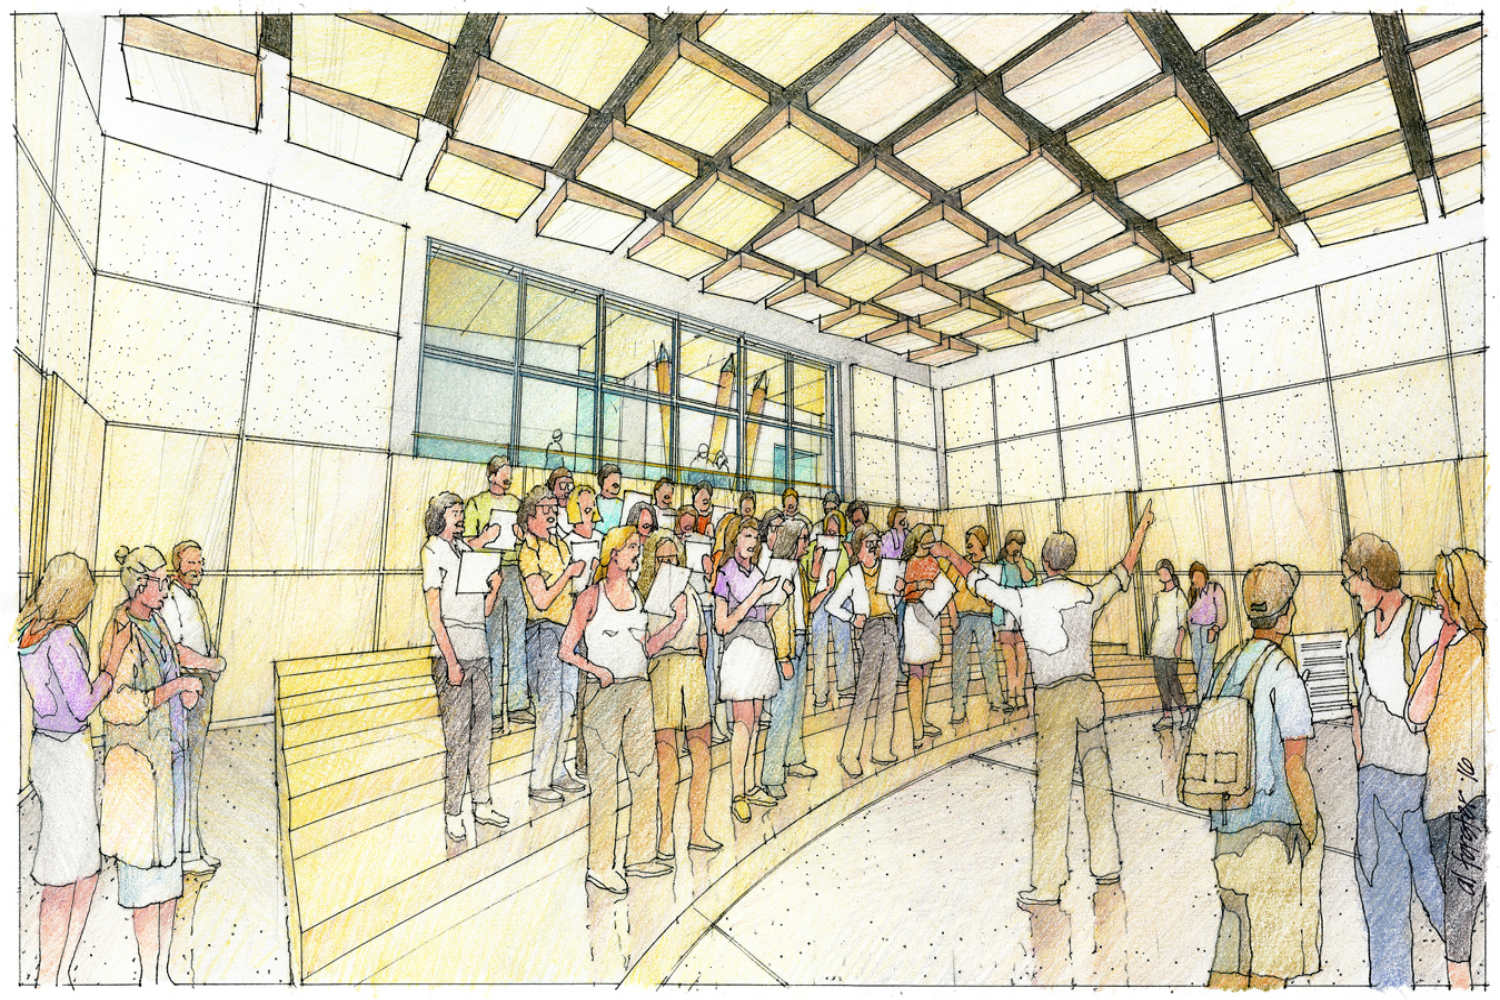 Concordia University Irvine, WSDG was commissioned for the design and acoustics of the facility. Sketch choir room